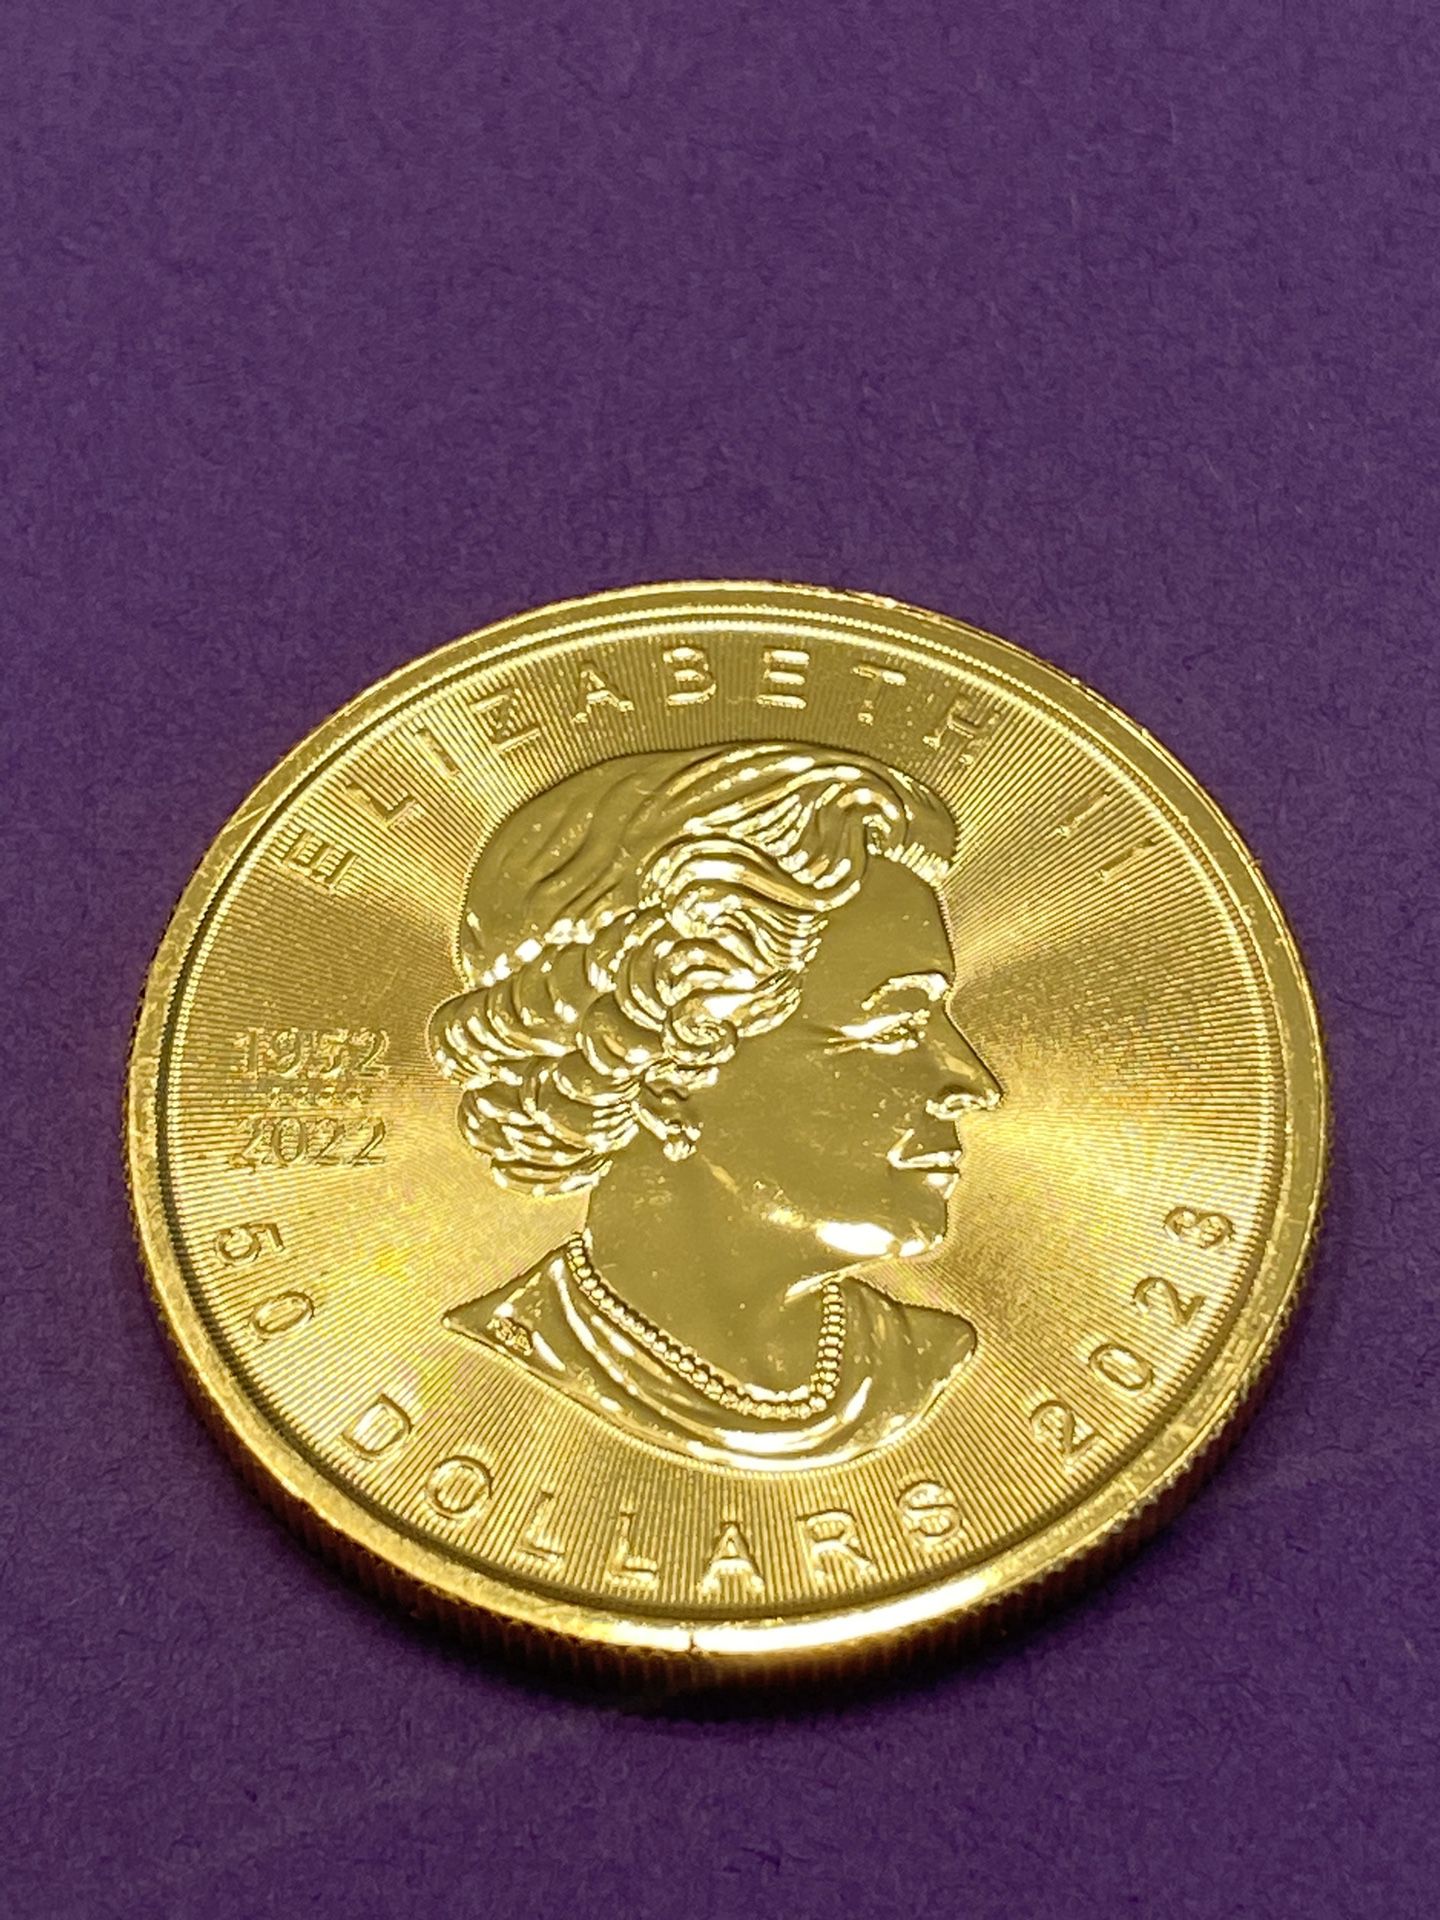 2023 ONE OUNCE GOLD CANADIAN MAPLE LEAFS